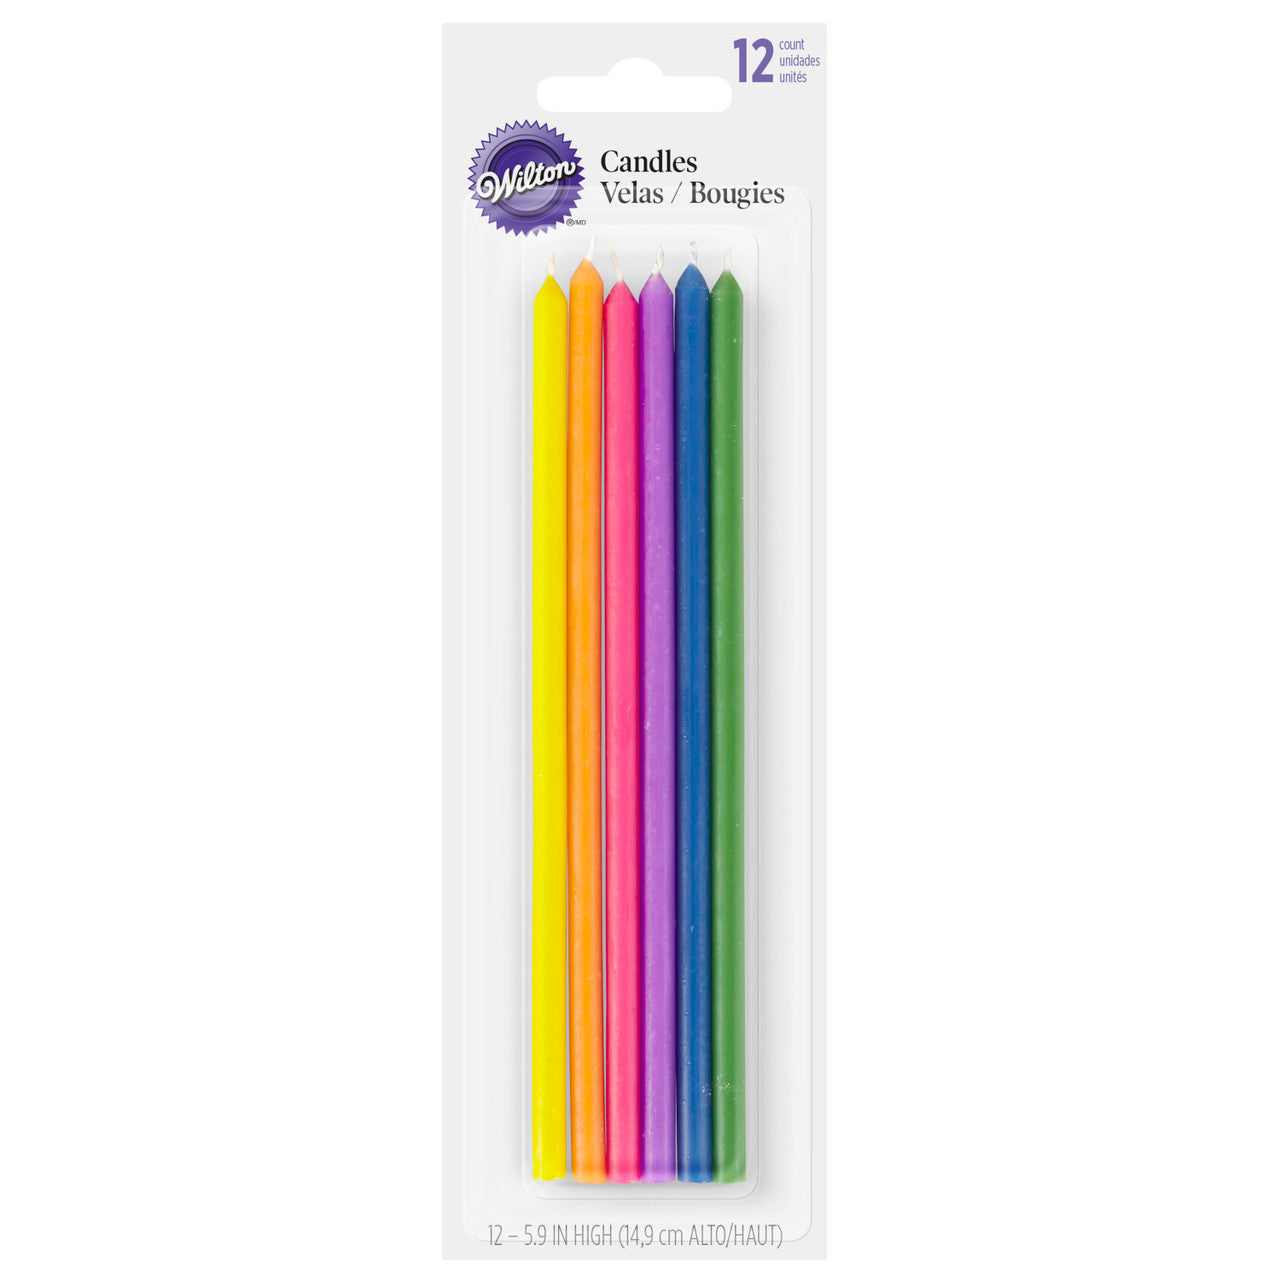 Bright Colored Tall Candles, 12 pack